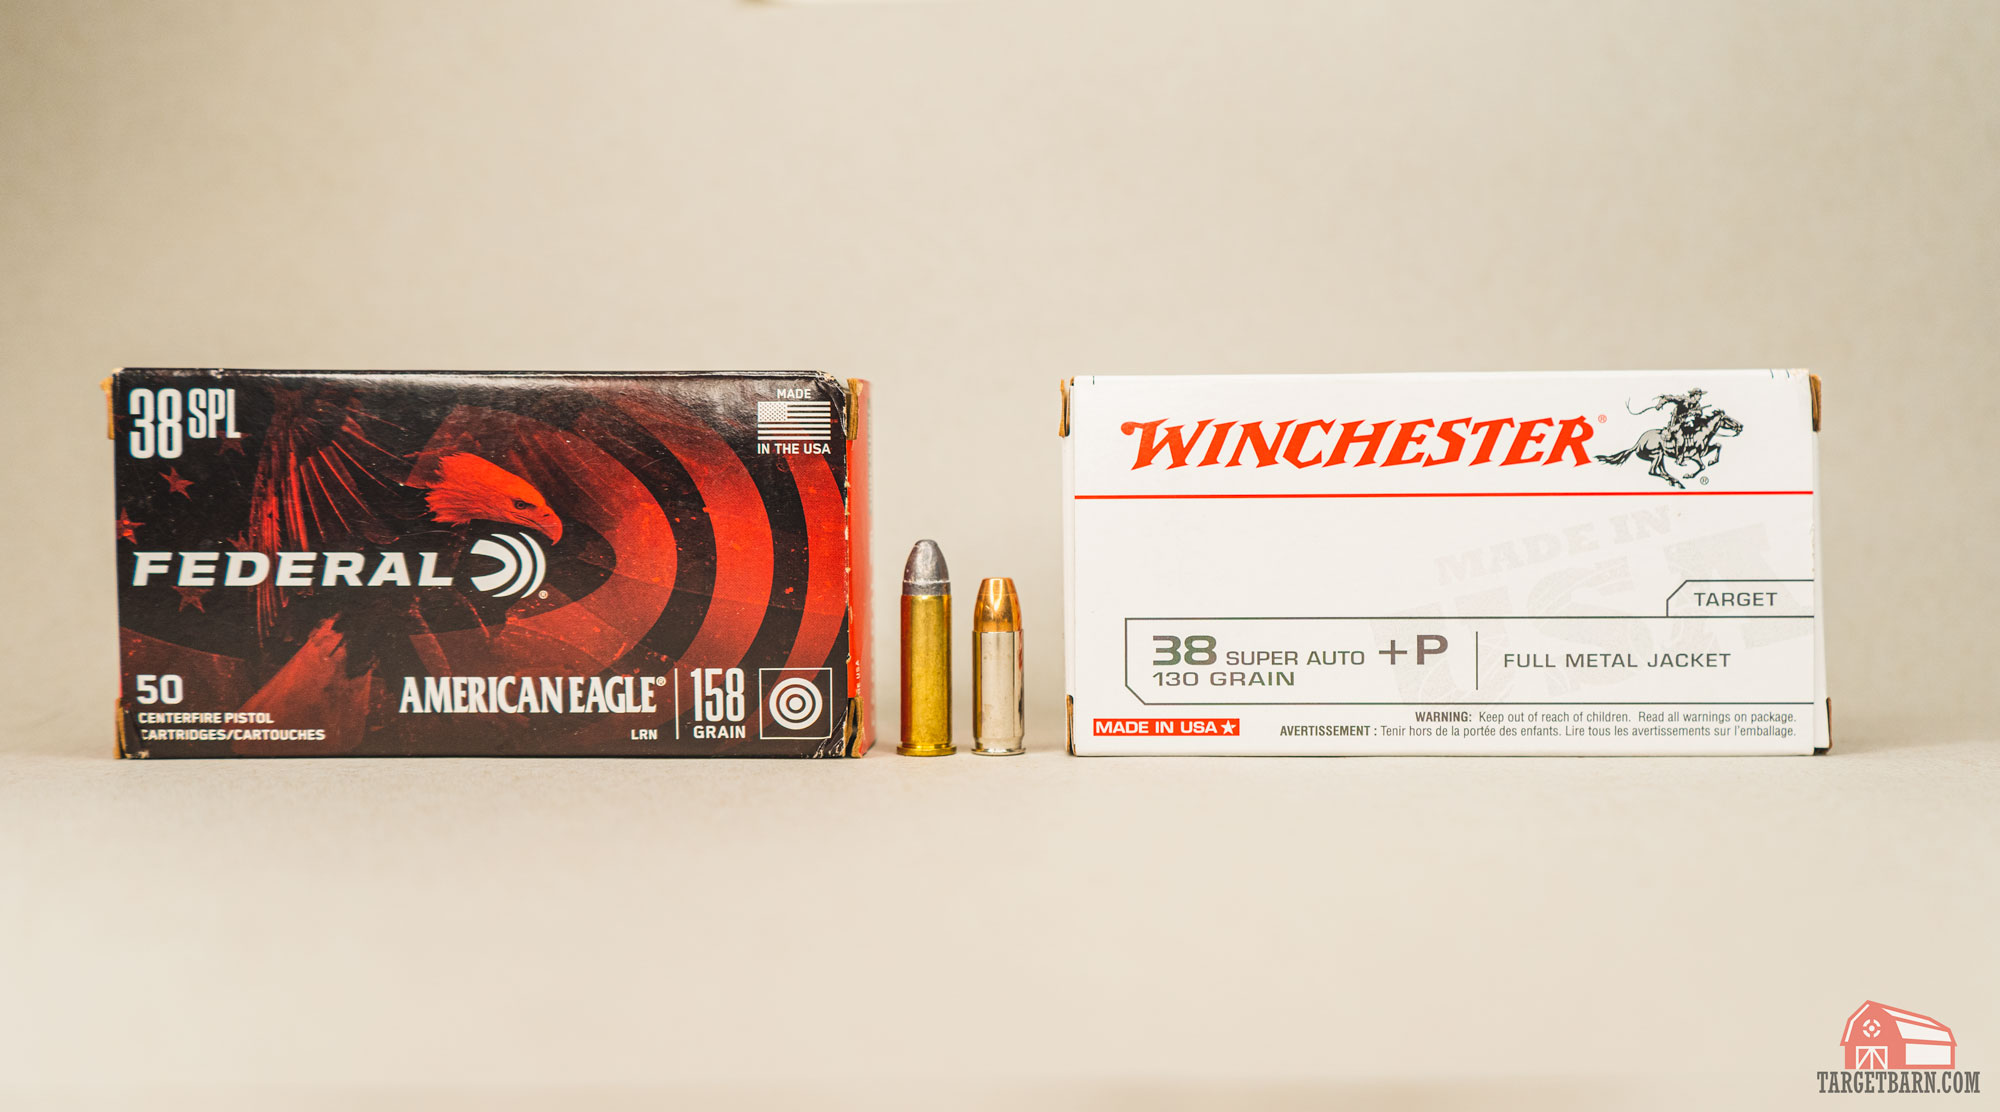 a box and one round of federal american eagle 38 special next to a box and one round of winchester 38 super ammo